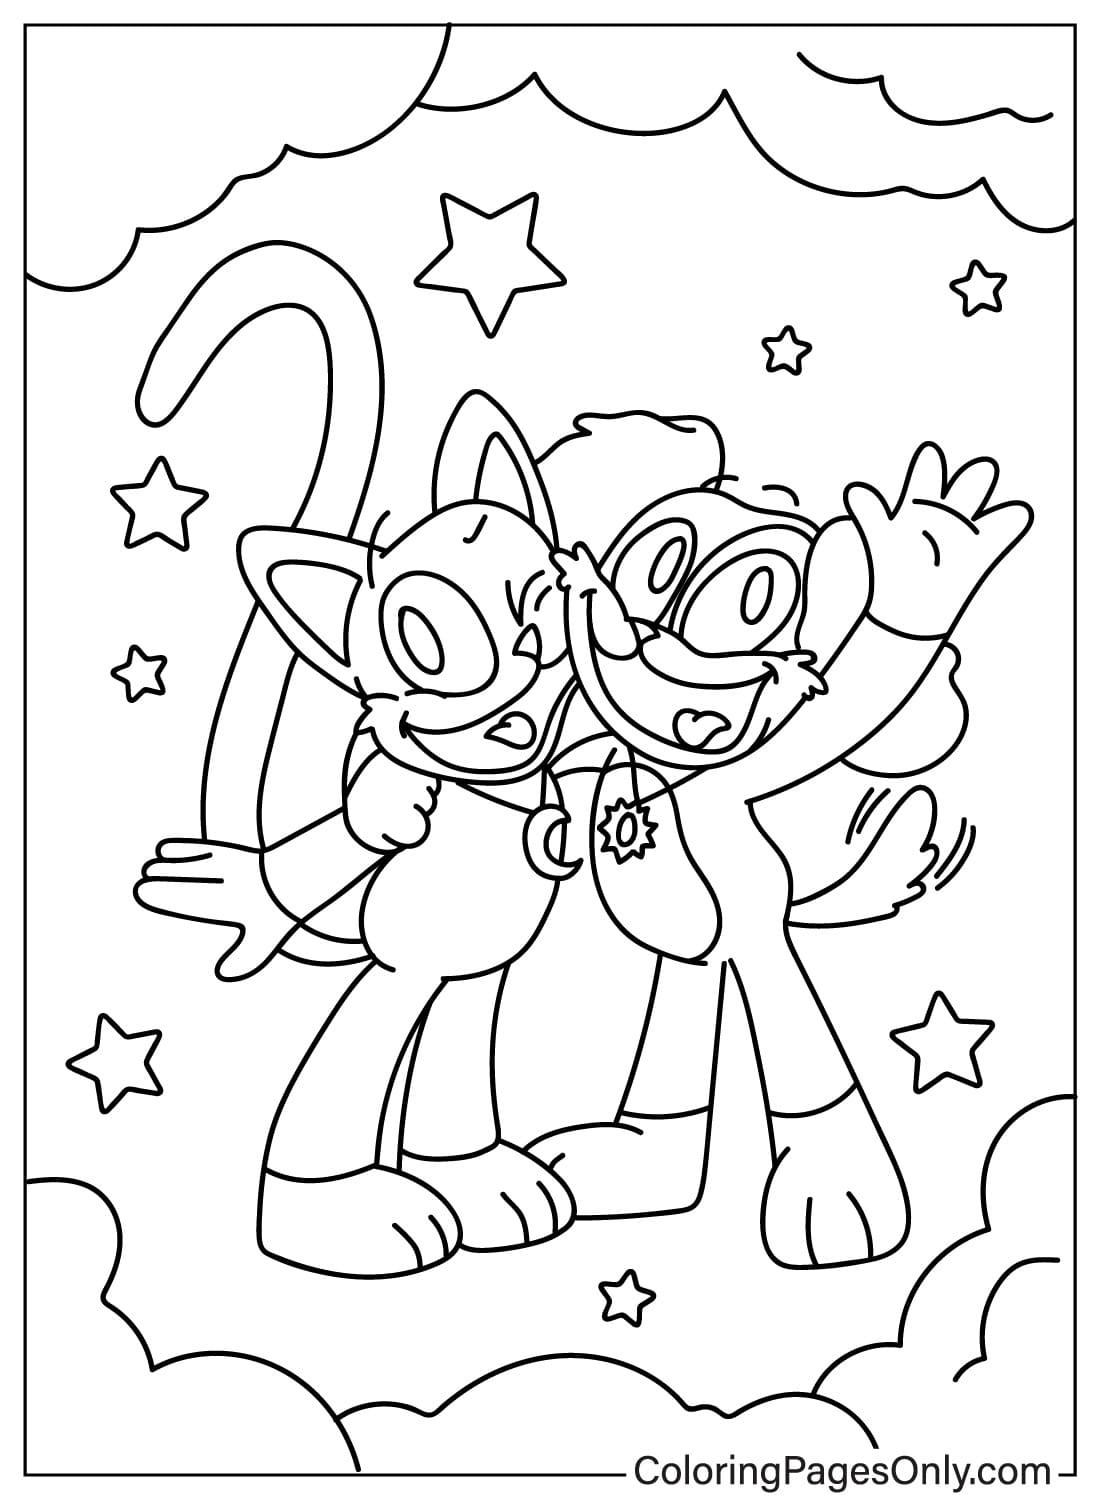 CatNap, DogDay Coloring Page - Free ...